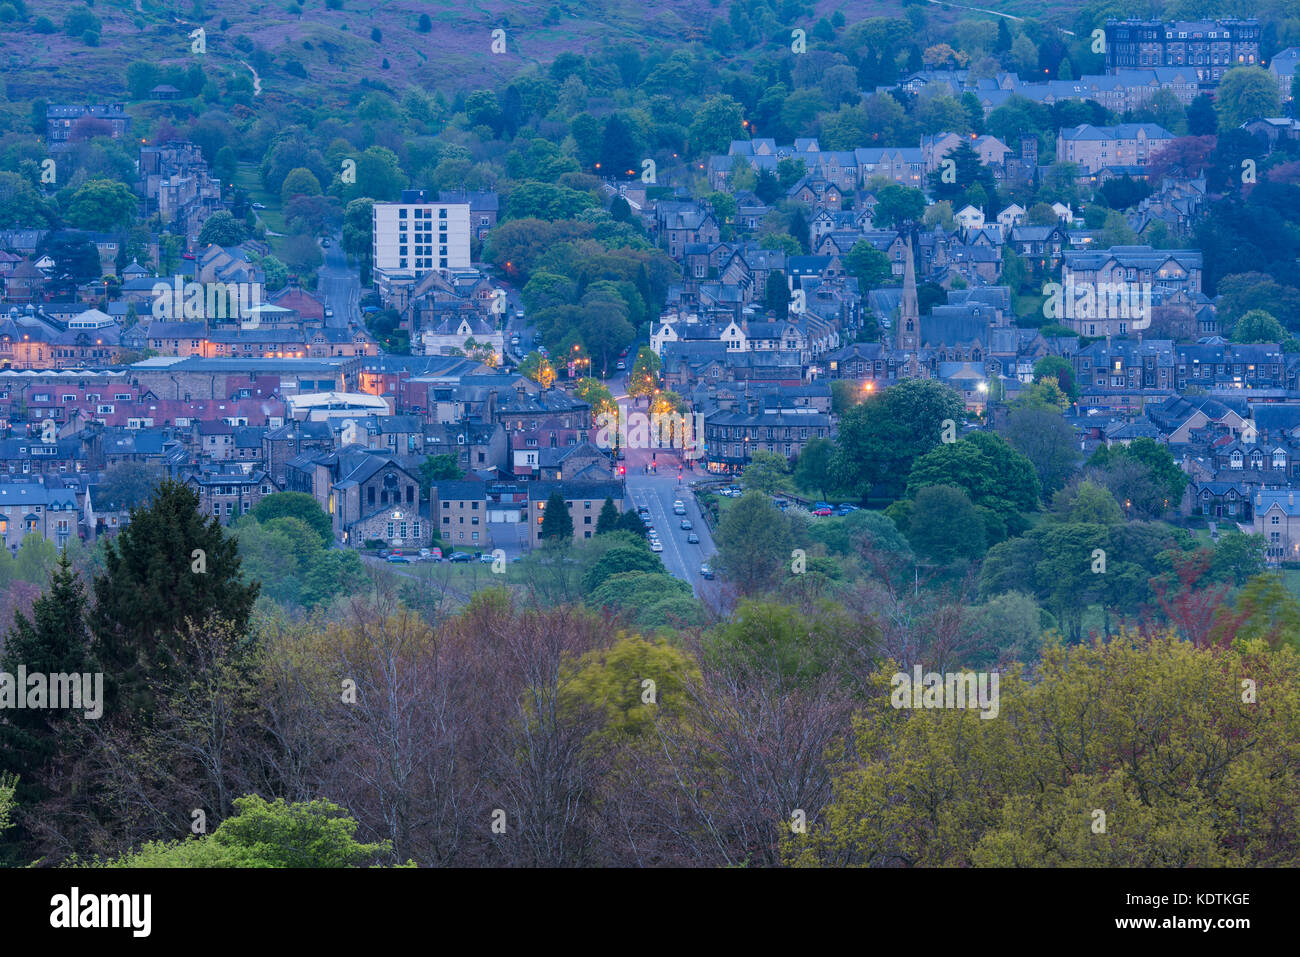 Evening view of Ilkley town centre nestling in Wharfe Valley - residential buildings, high street, lights on & moors - West Yorkshire, England, UK. Stock Photo